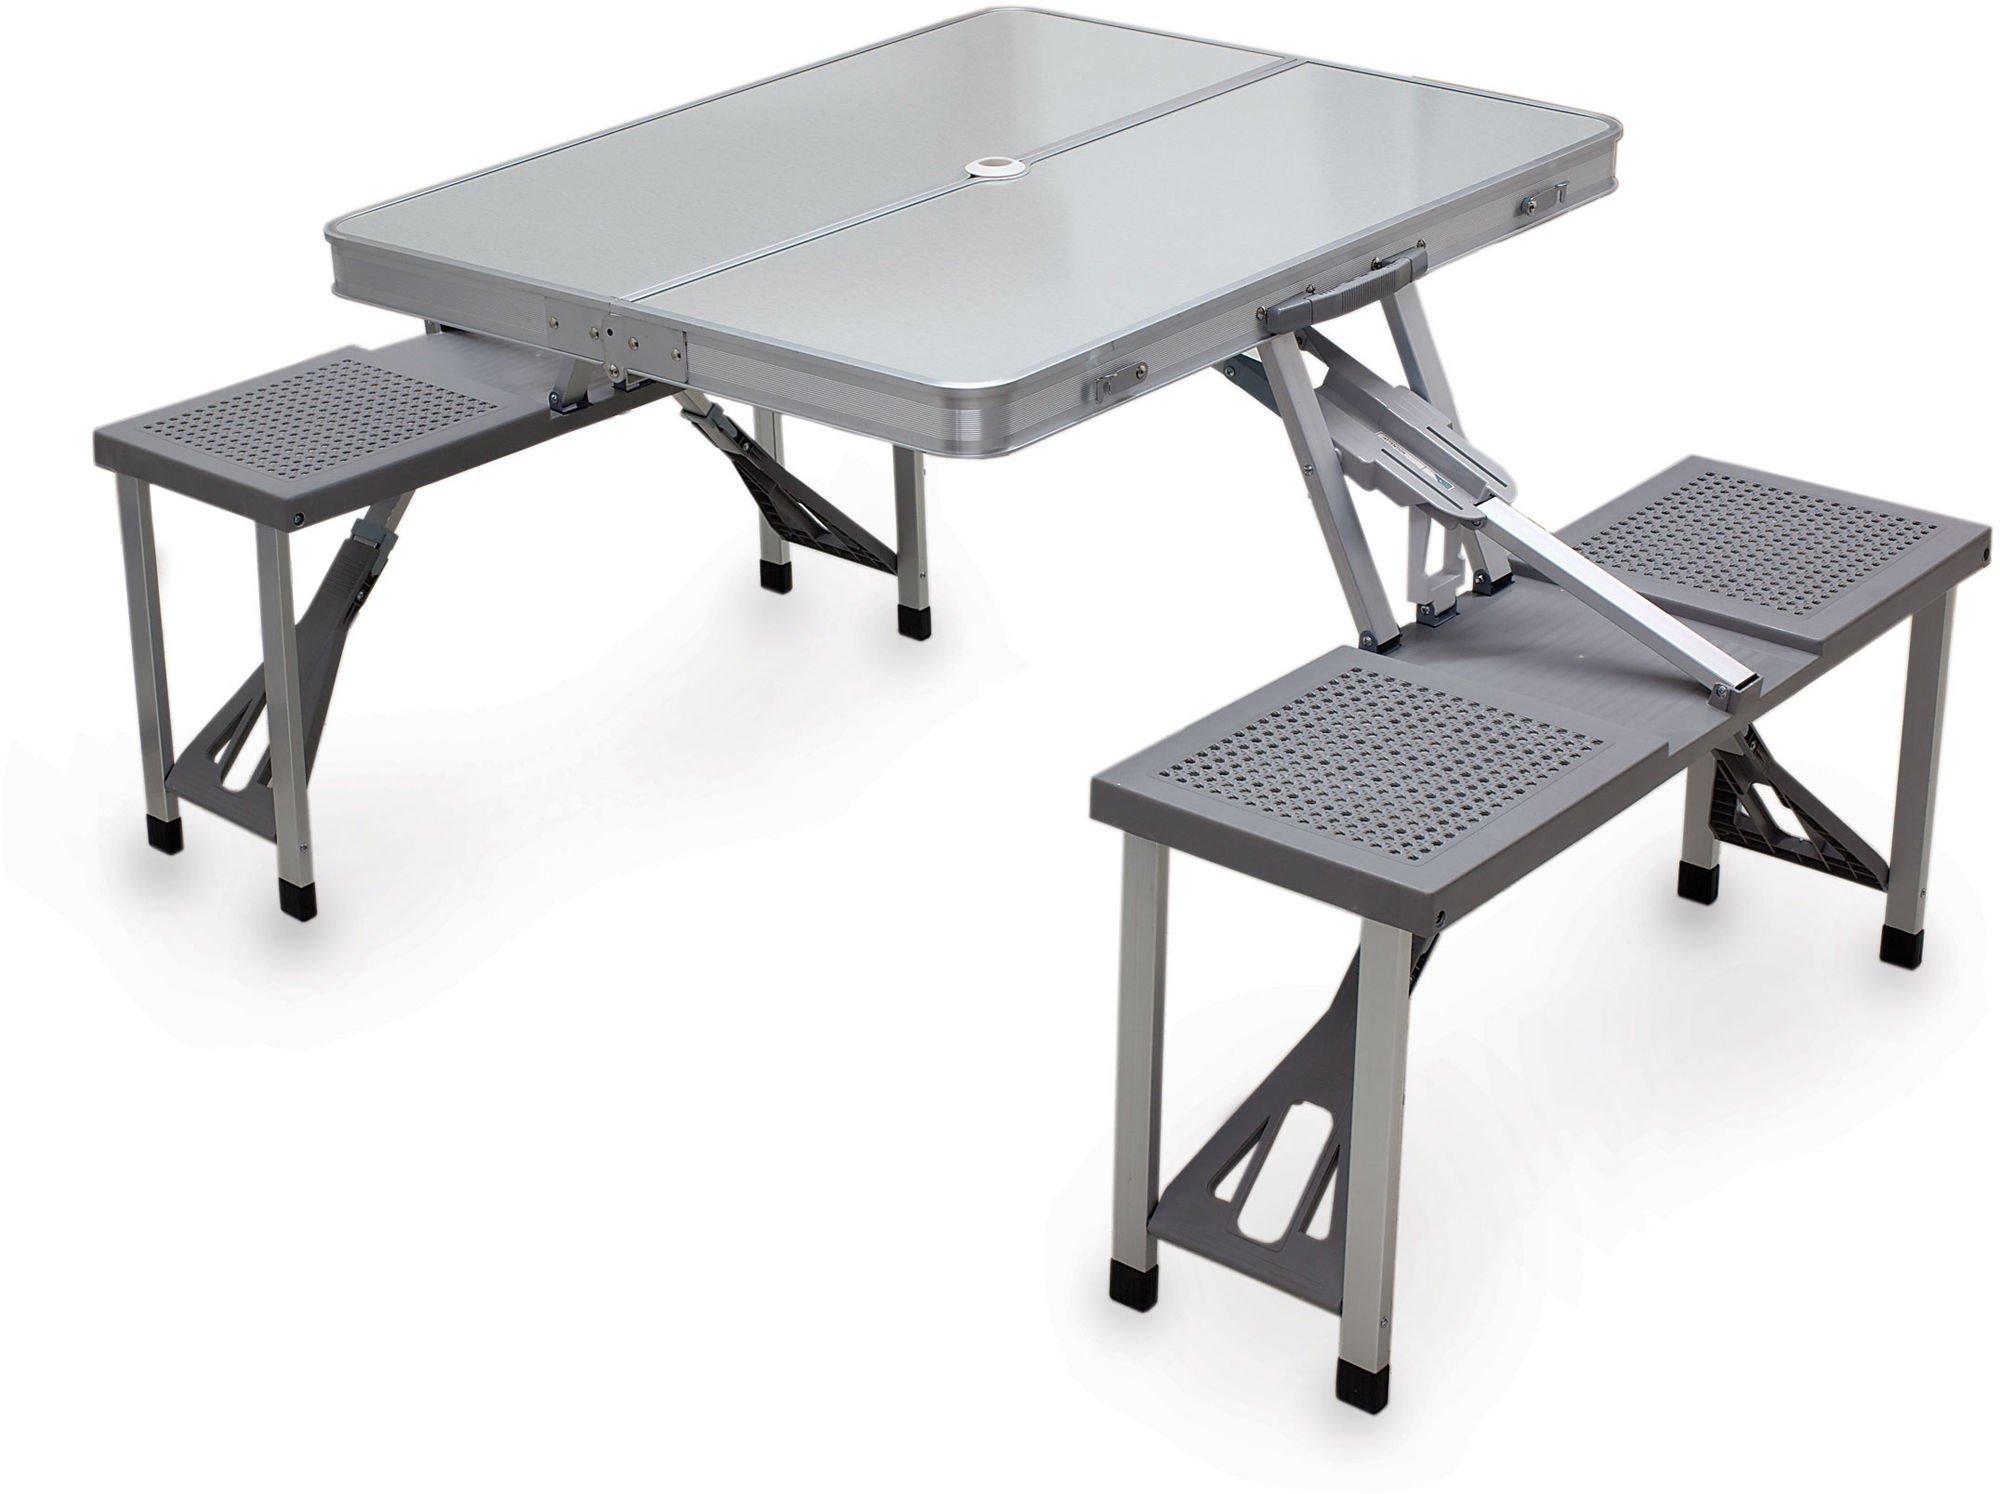 Picnic Time Aluminum Picnic Table with Seats